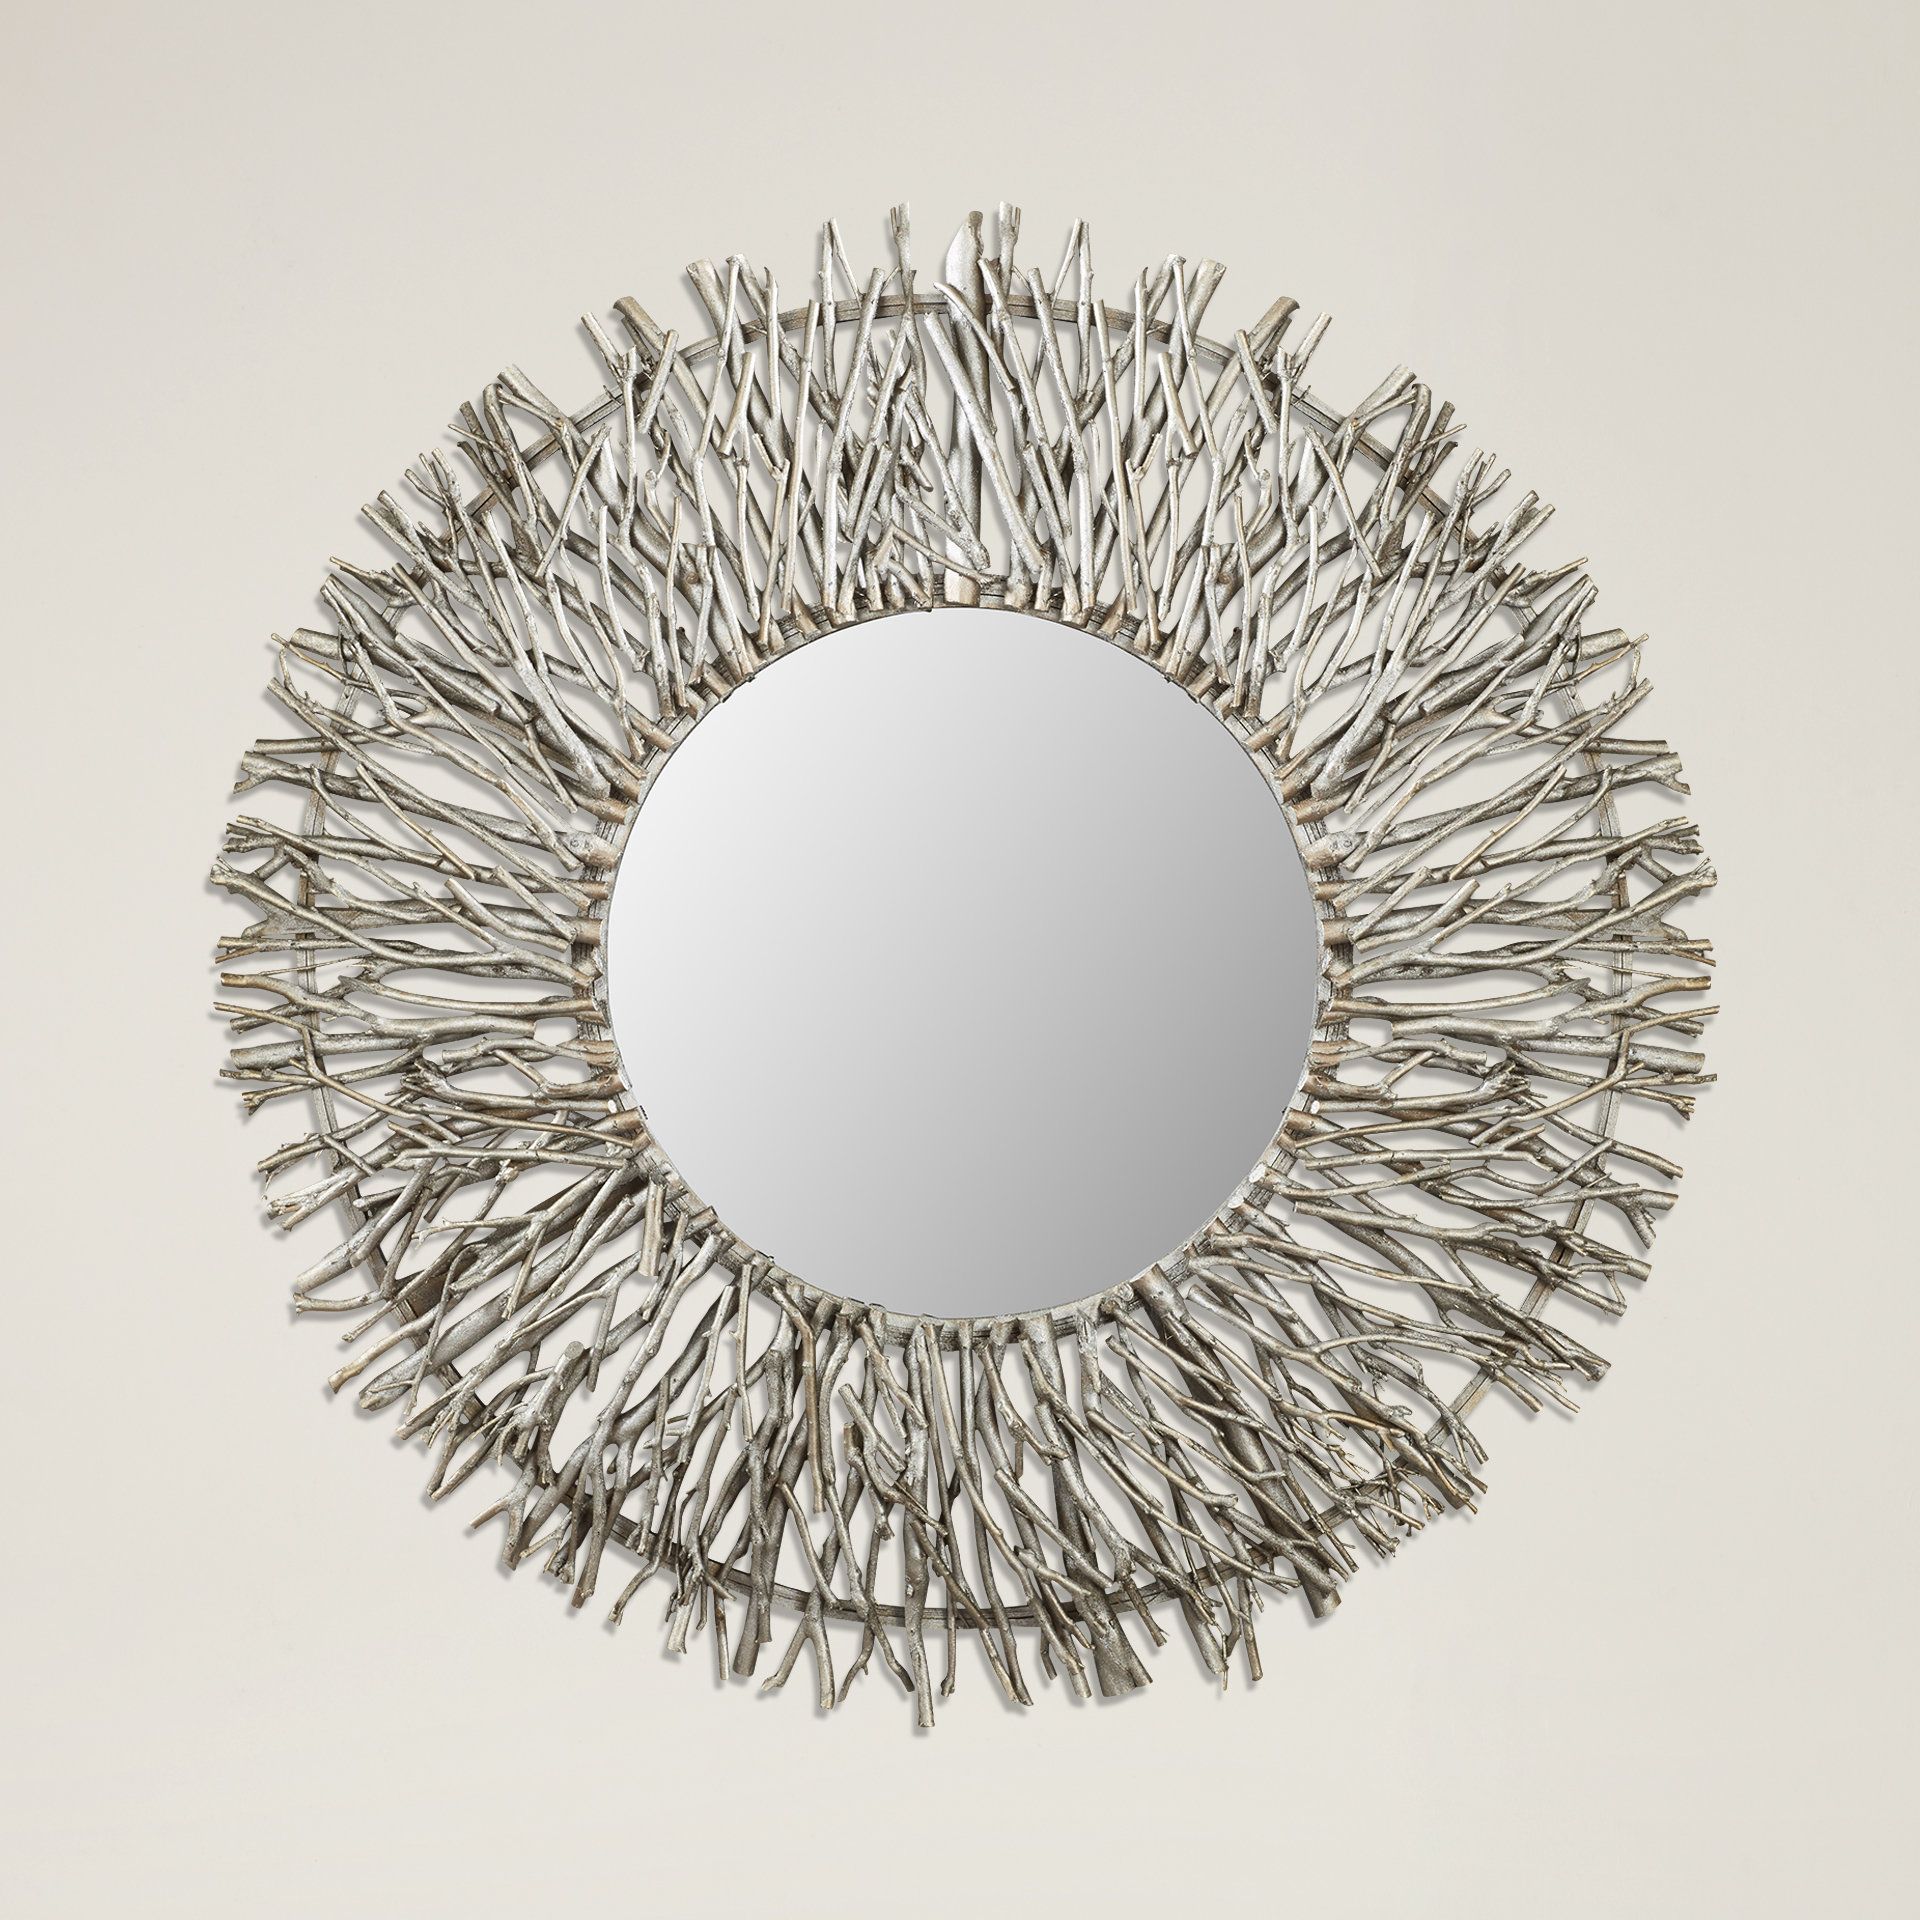 Karn Vertical Round Resin Wall Mirrors With Regard To Newest Cromartie Tree Branch Wall Mirror (View 7 of 20)